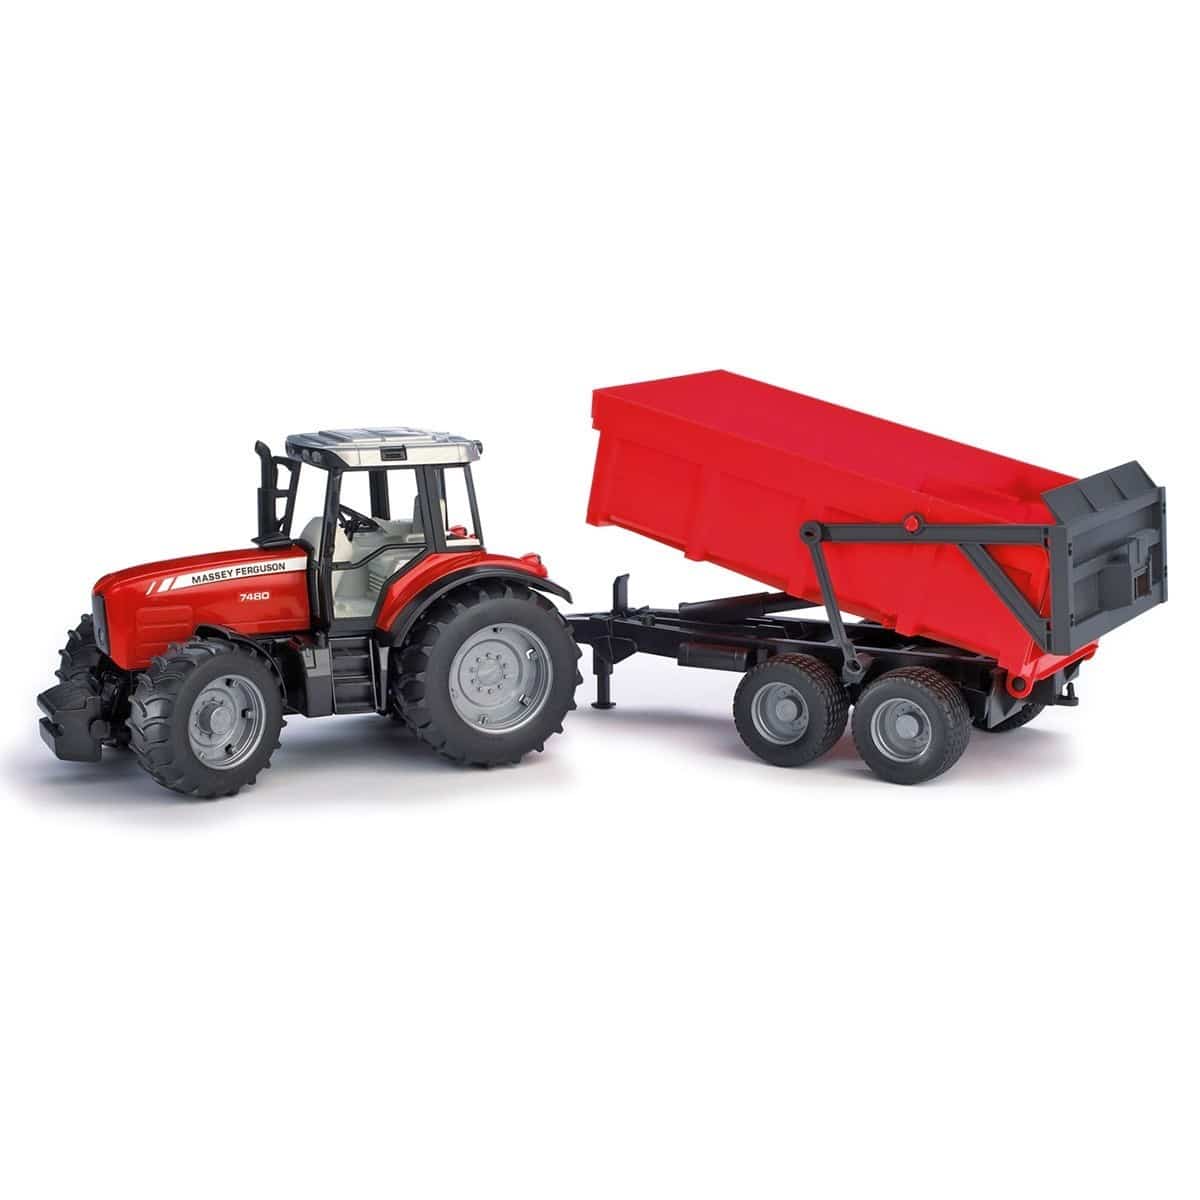 Bruder - Massey Ferguson 7480 Tractor with Tipping Trailer